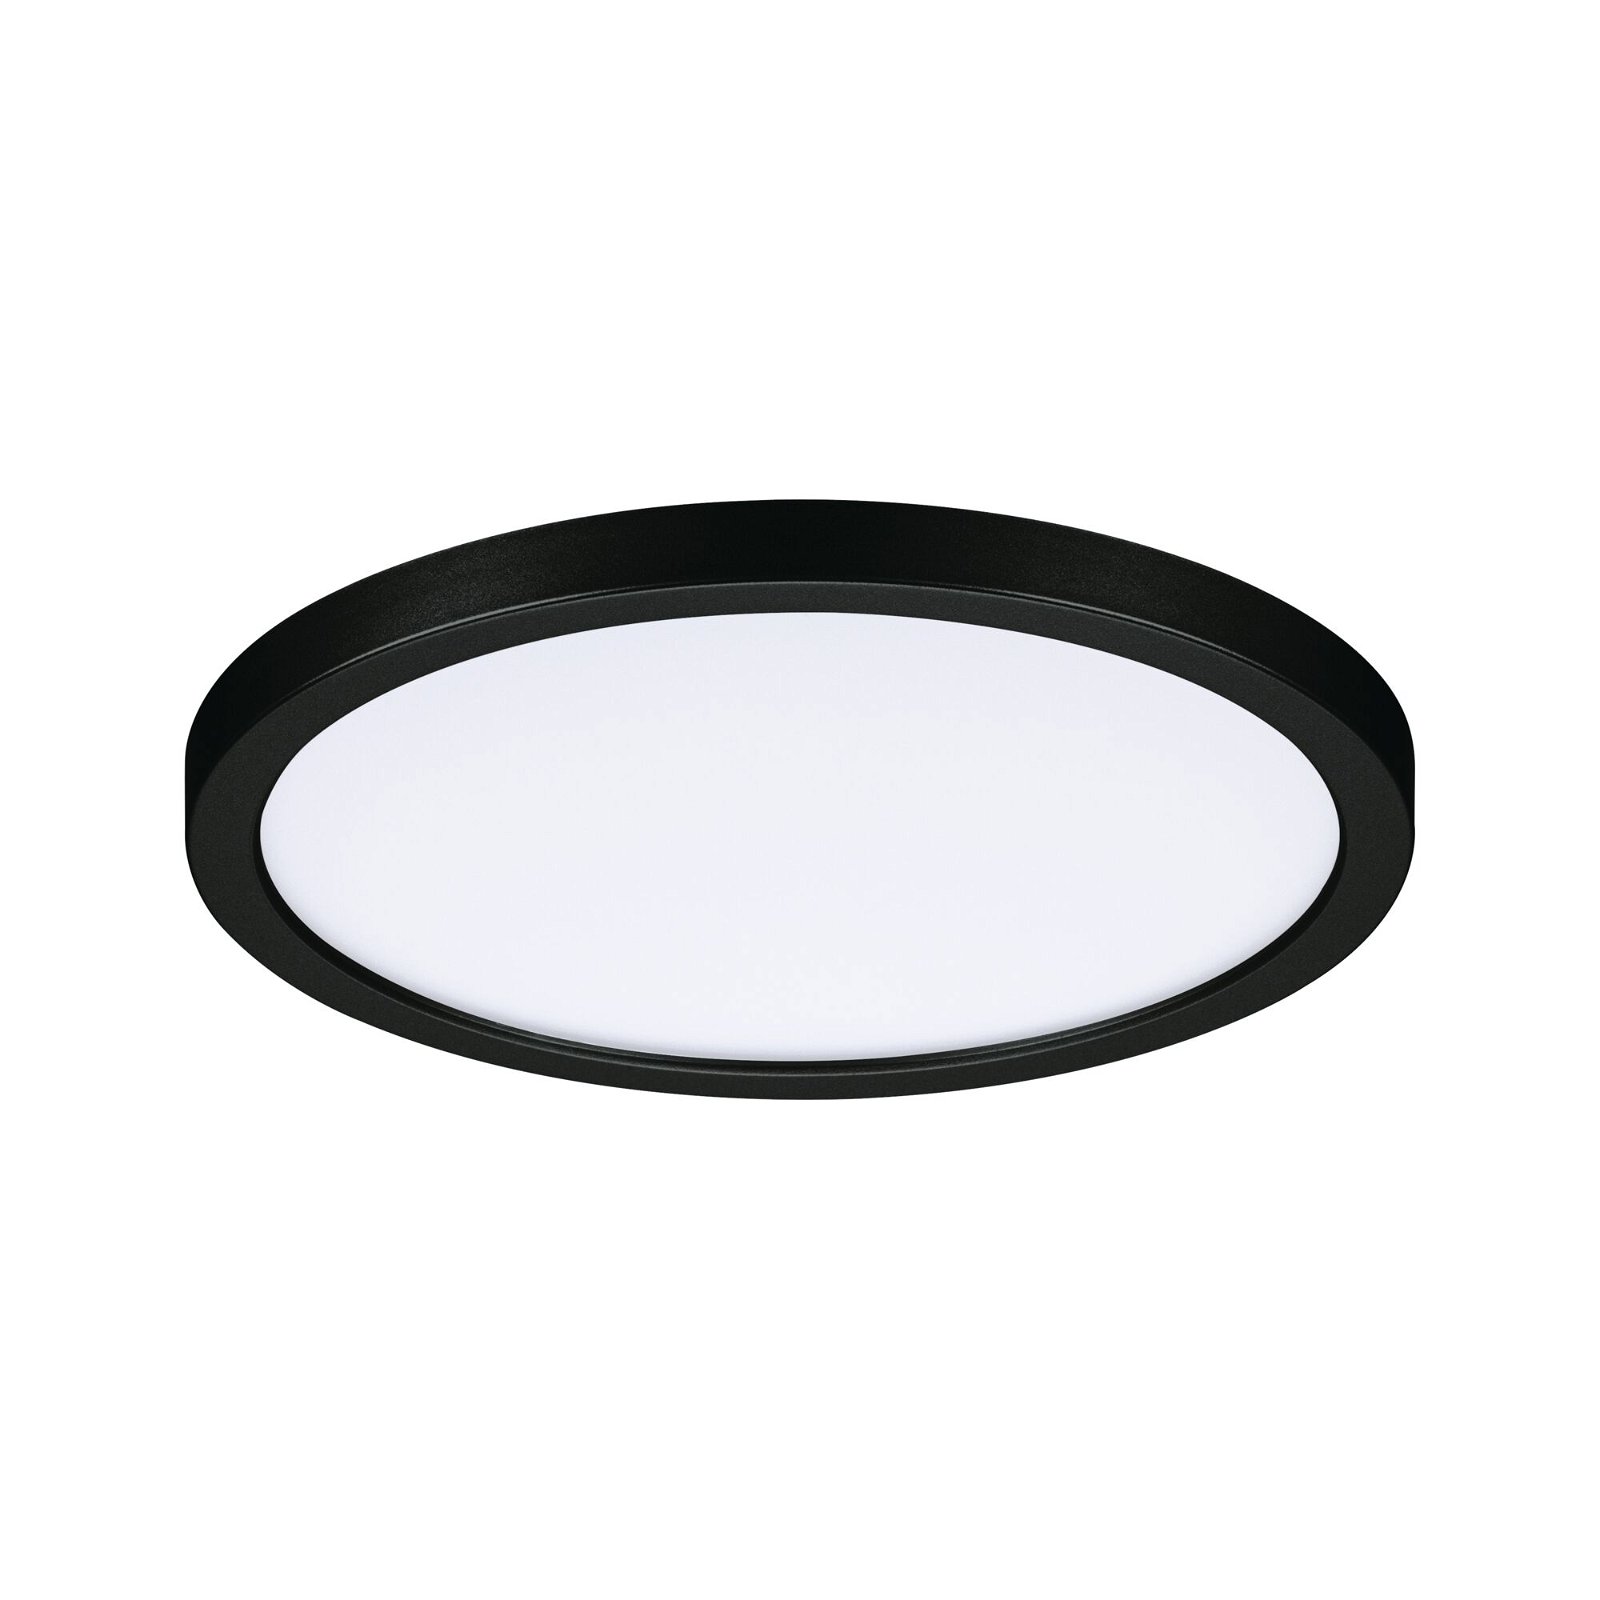 VariFit LED Recessed panel 3-Step-Dim Areo IP44 round 175mm 13W 1300lm 4000K Black dimmable